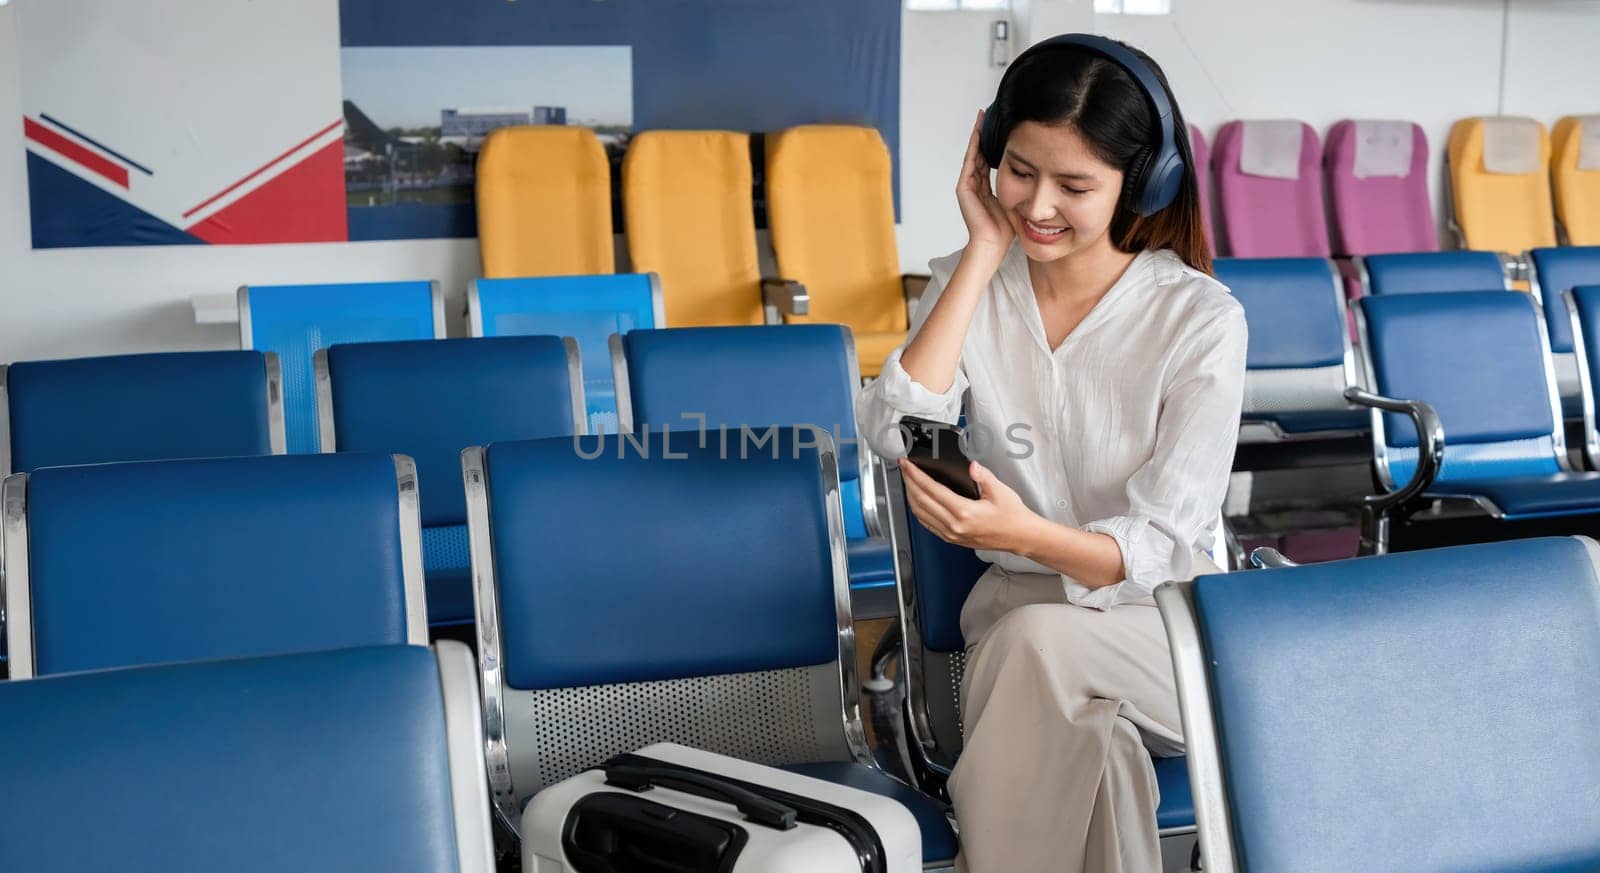 Asian woman listening to music on smartphone in airport waiting area. Concept of travel, technology, and relaxation.